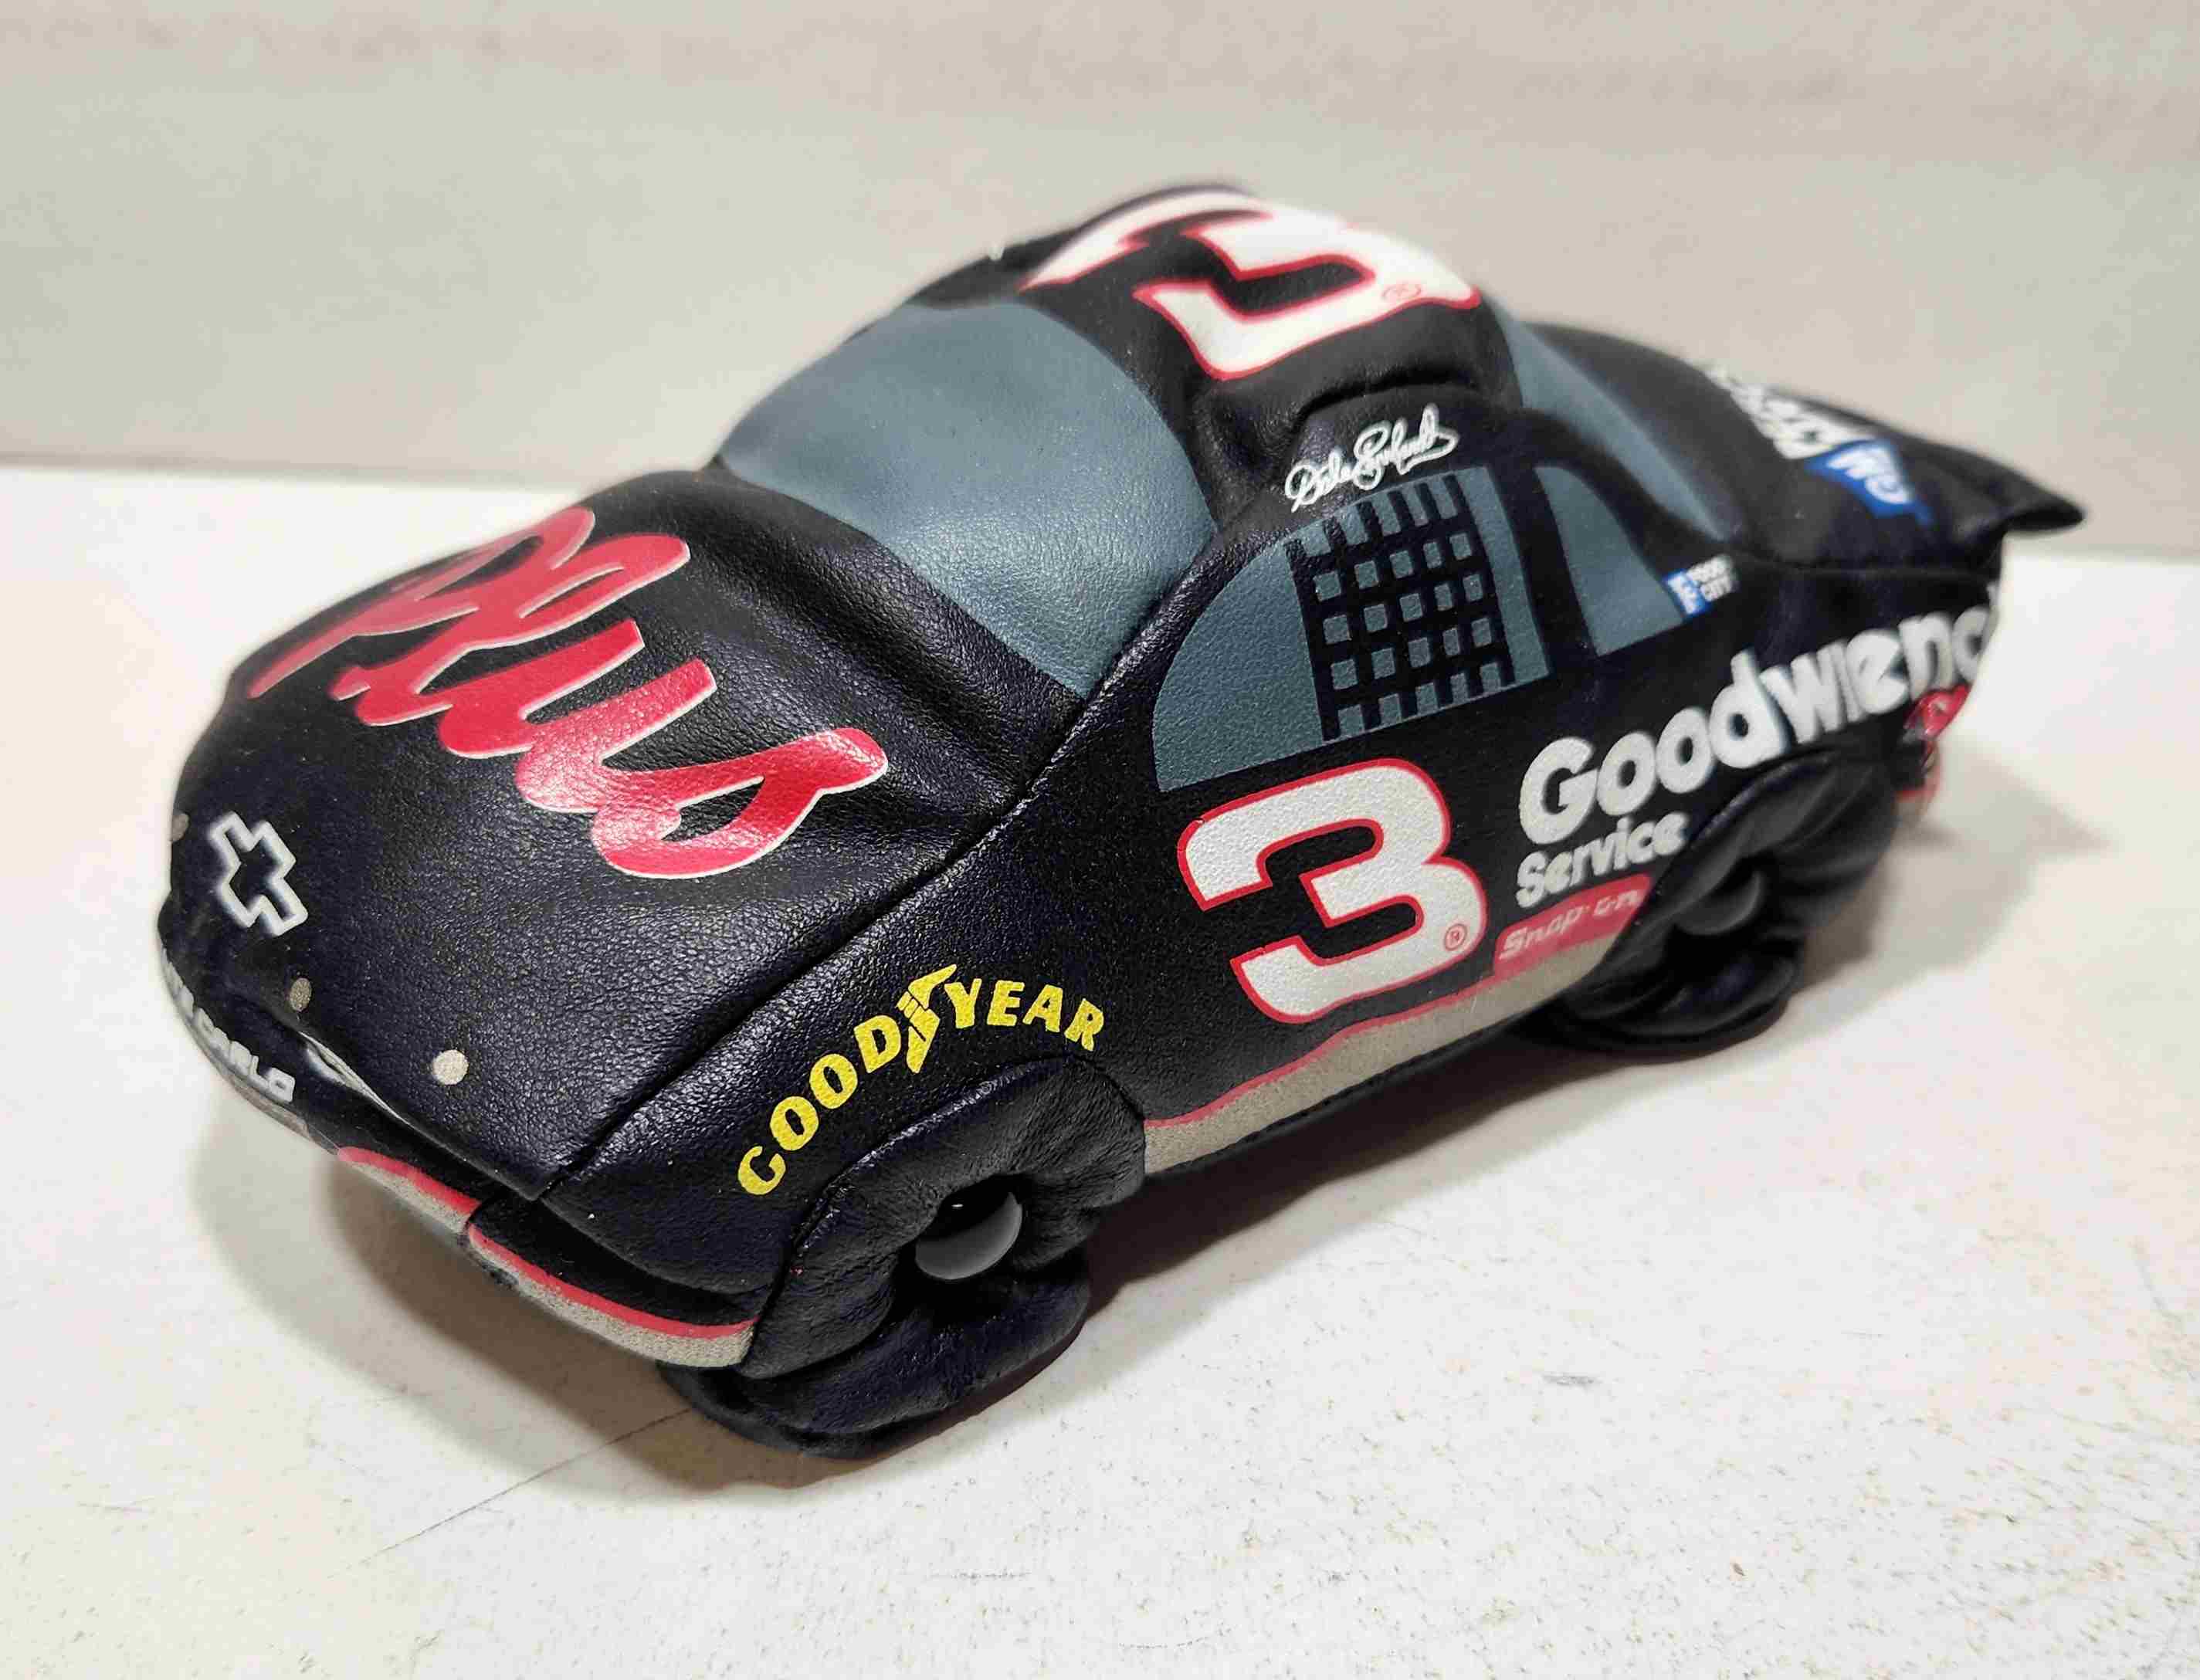 1998 Dale Earnhardt 1/24th Goodwrench Plus Bean Bag